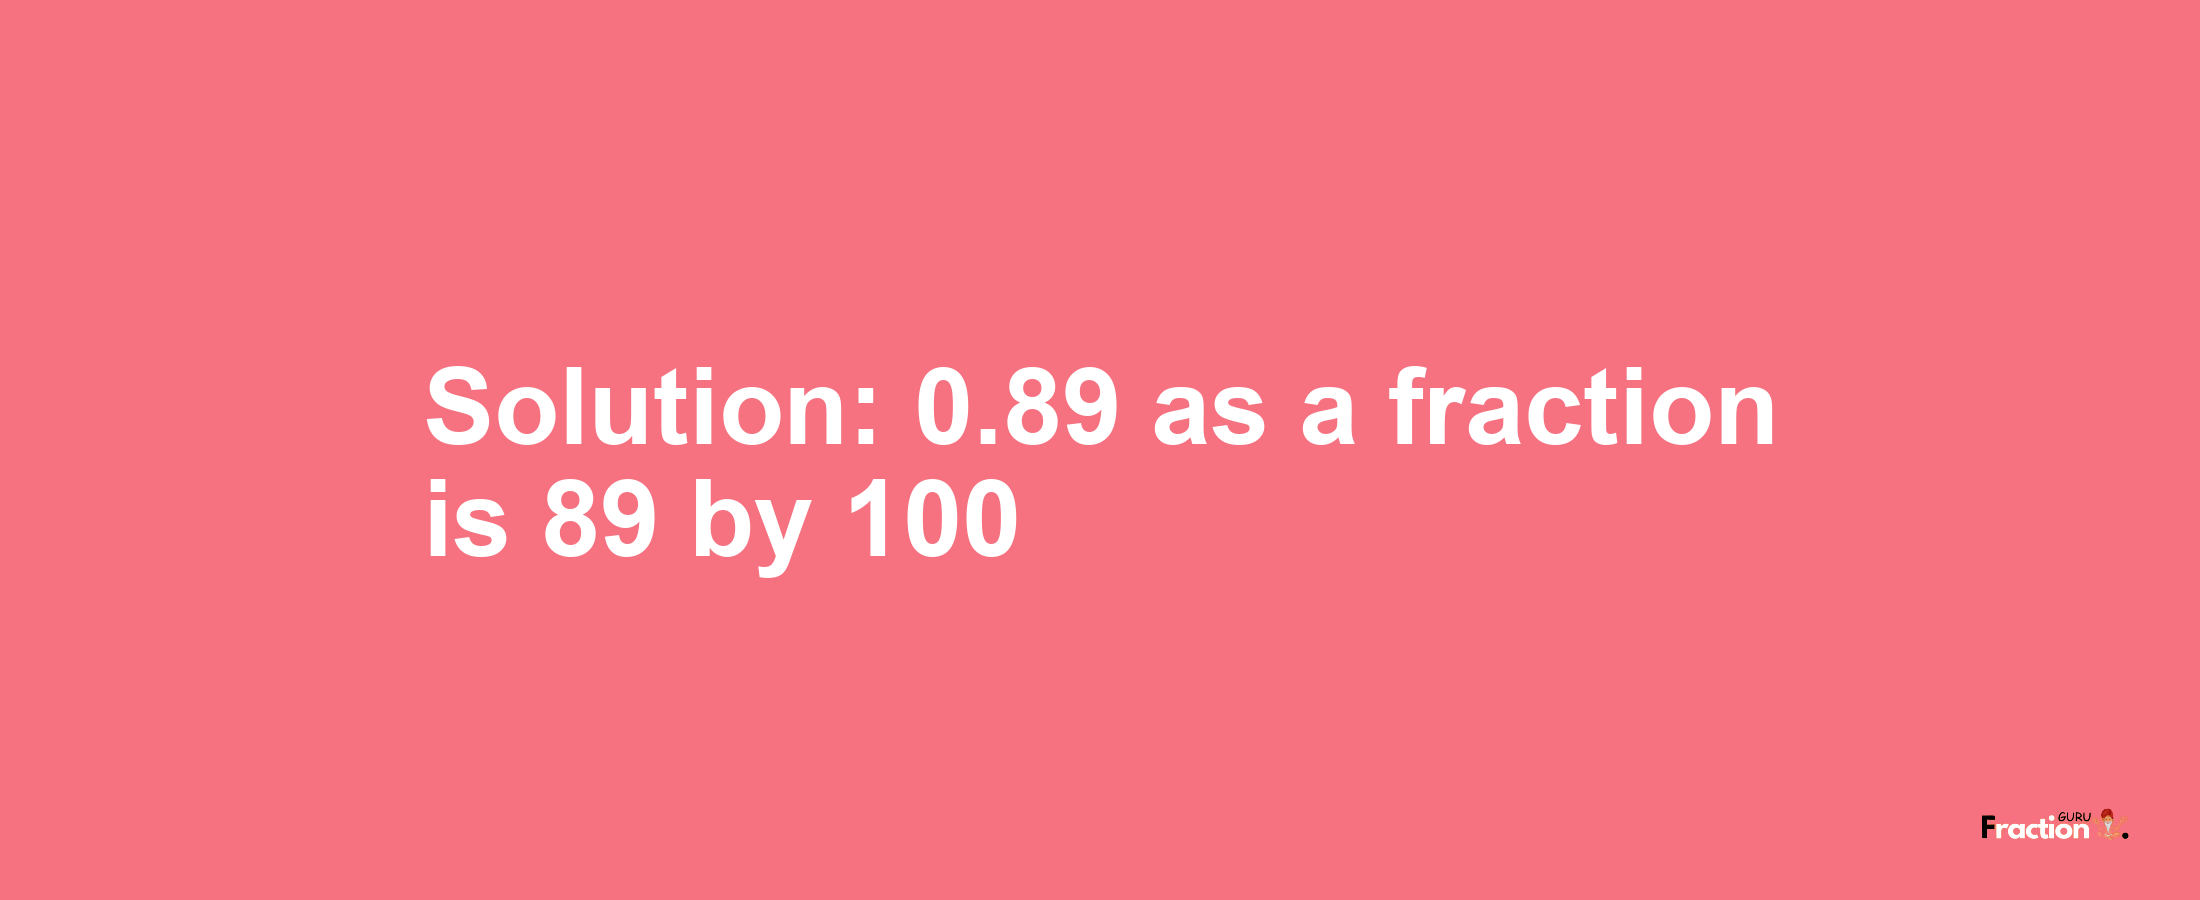 Solution:0.89 as a fraction is 89/100